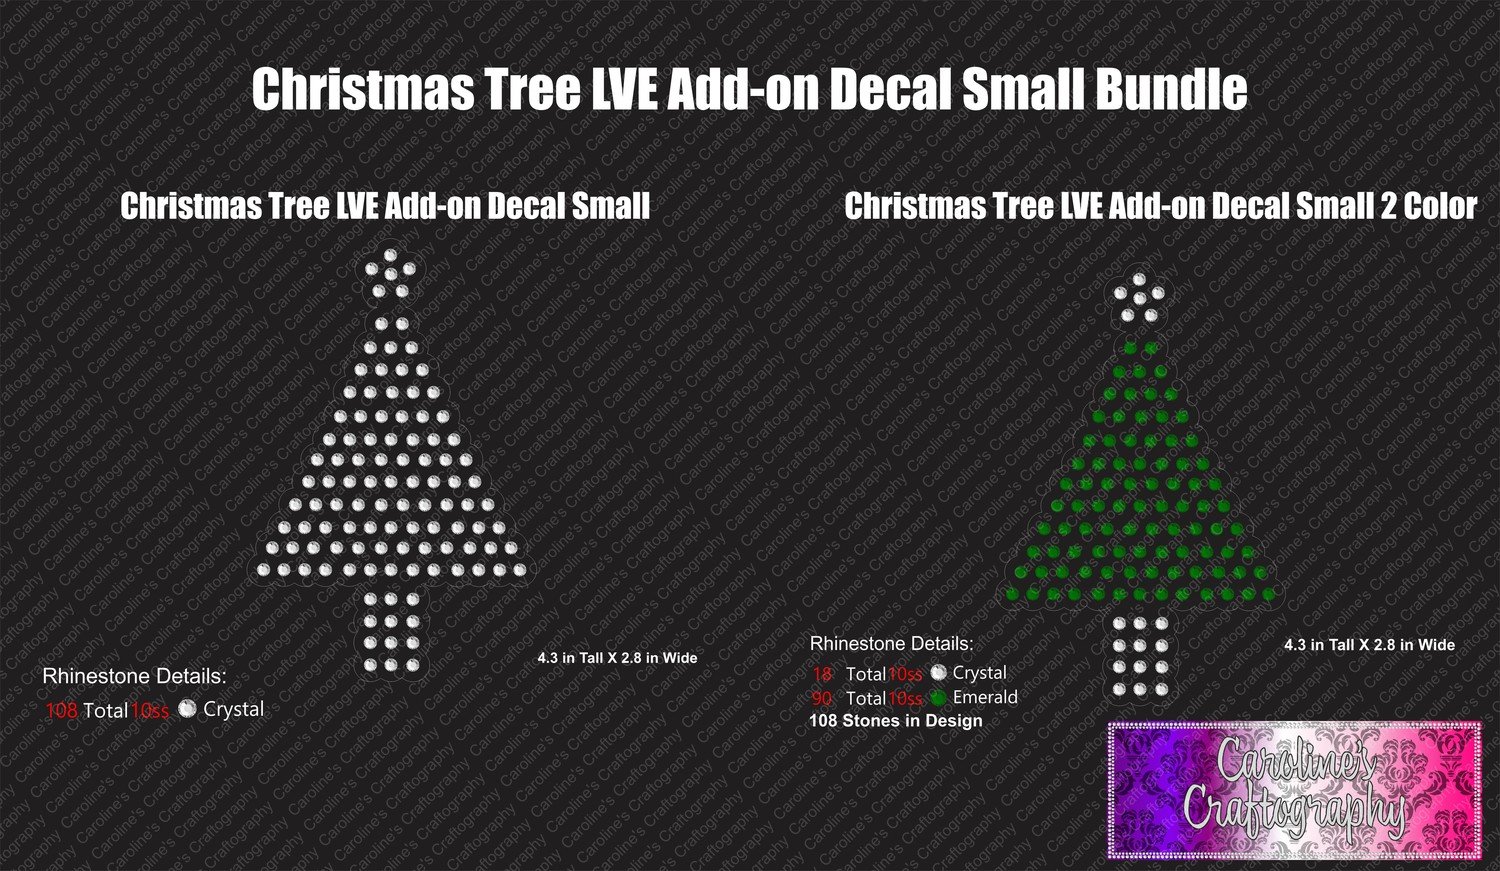 Christmas Tree LVE Add-on Decal Stone Budle